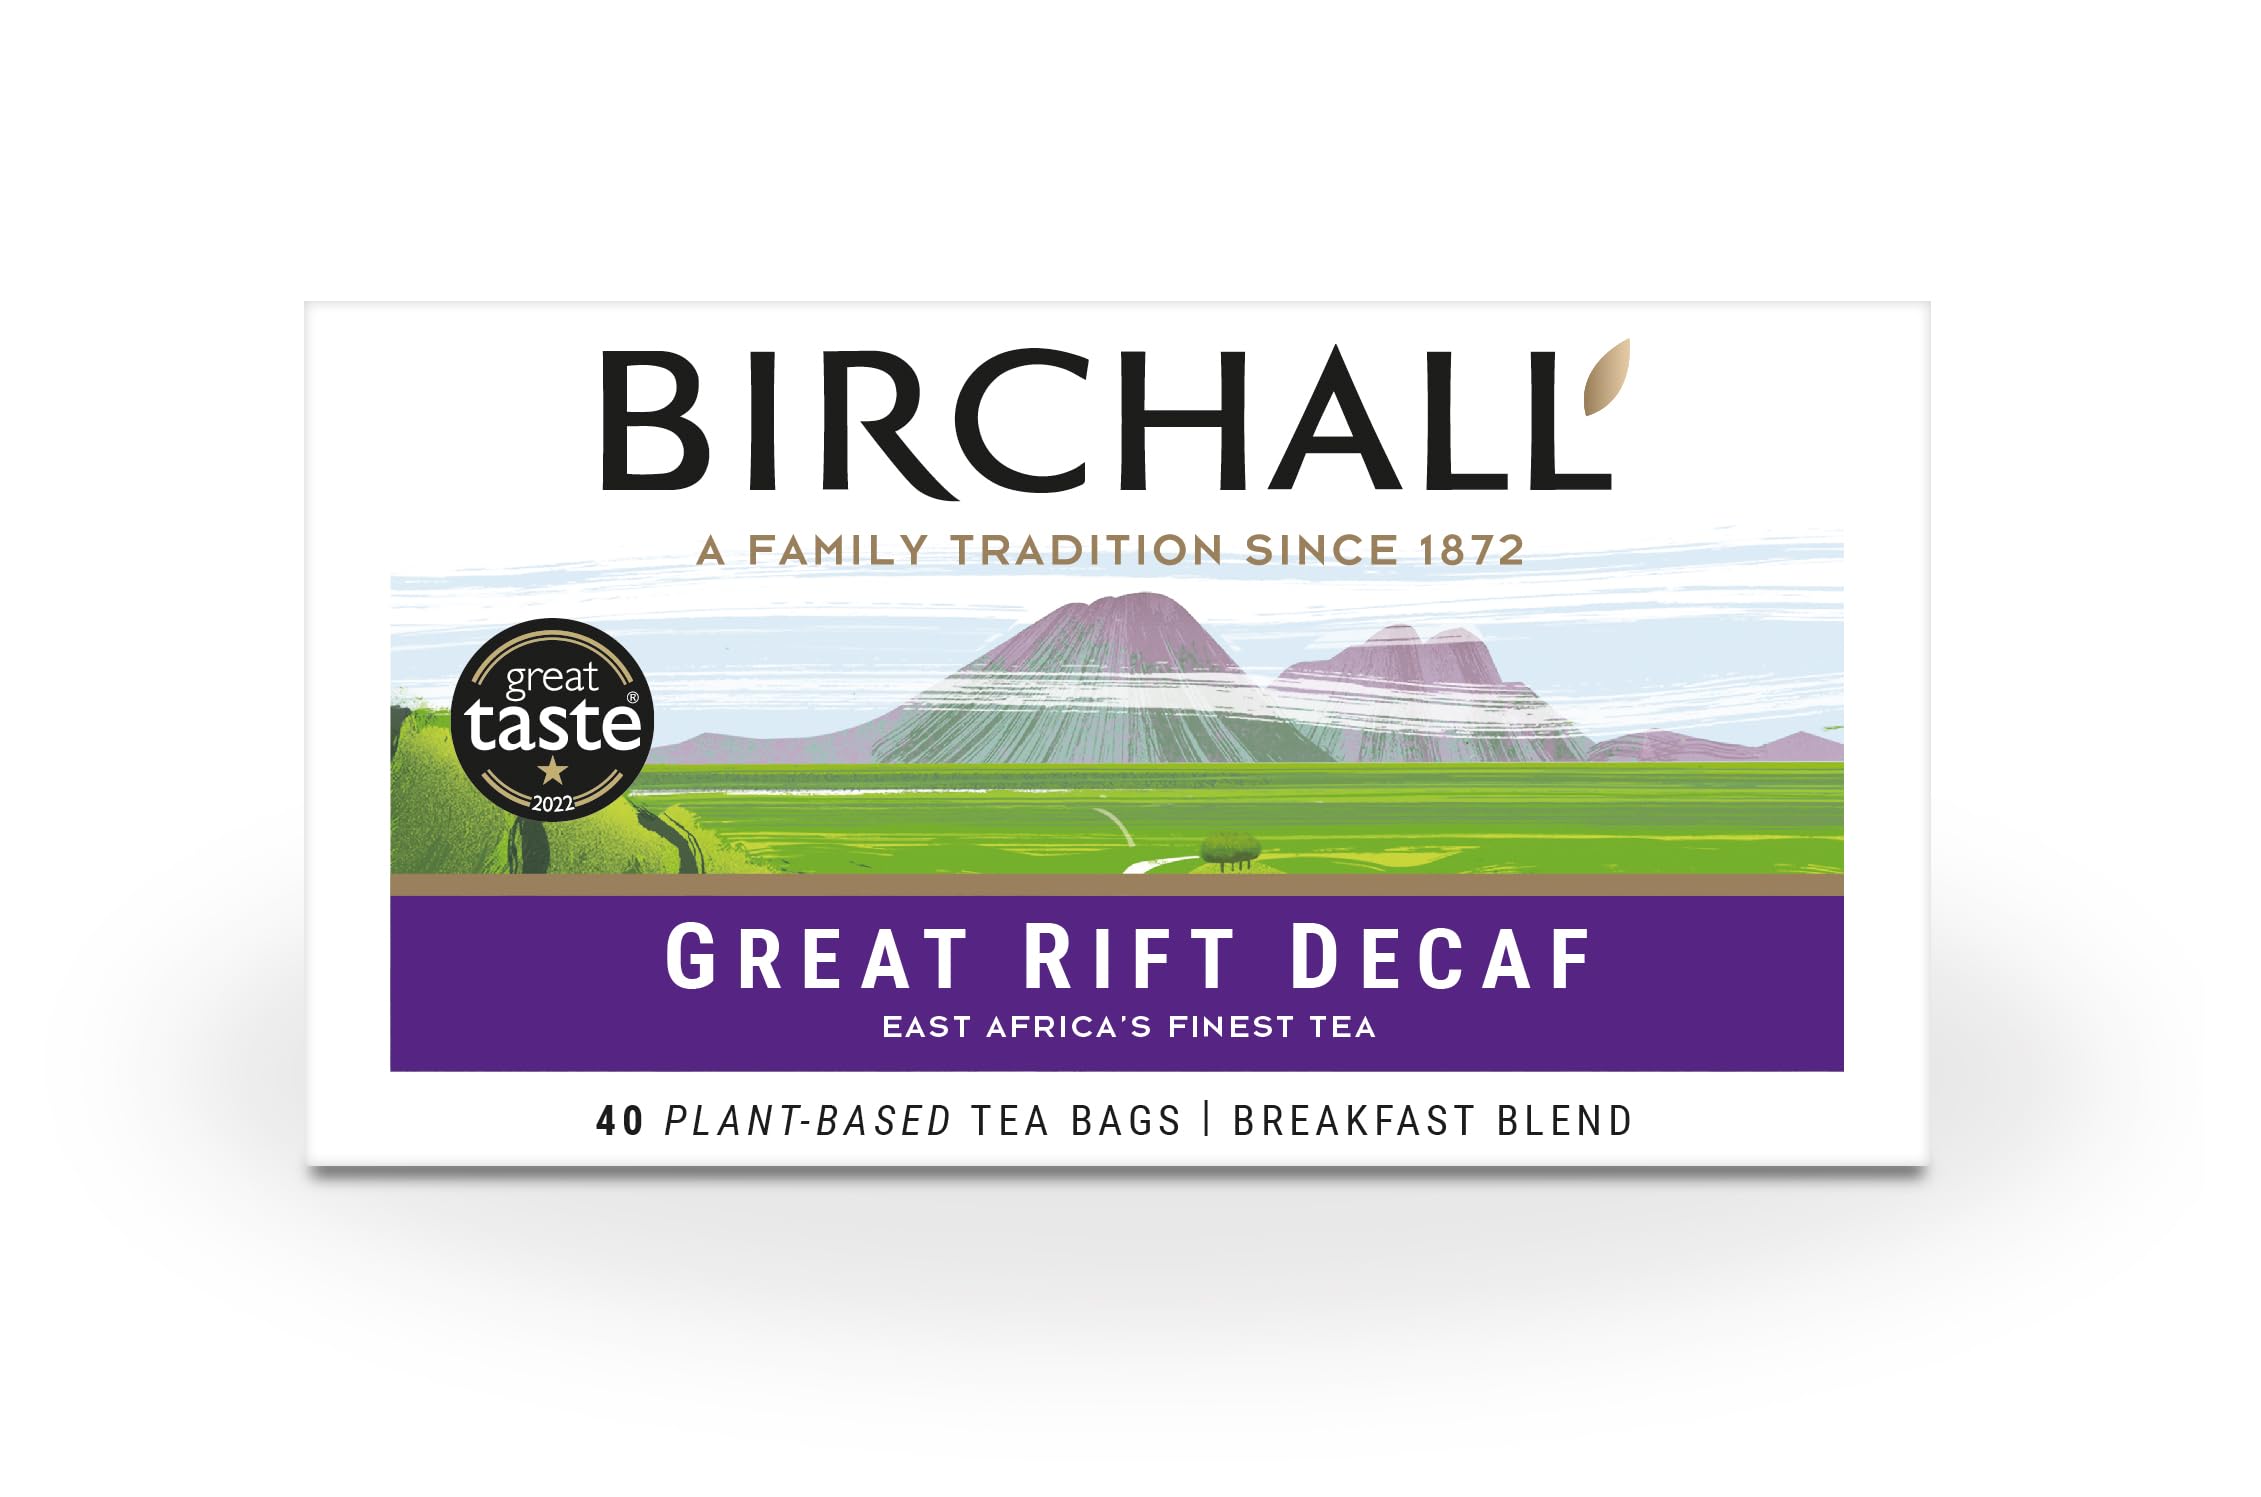 An update on plant-based tea bags